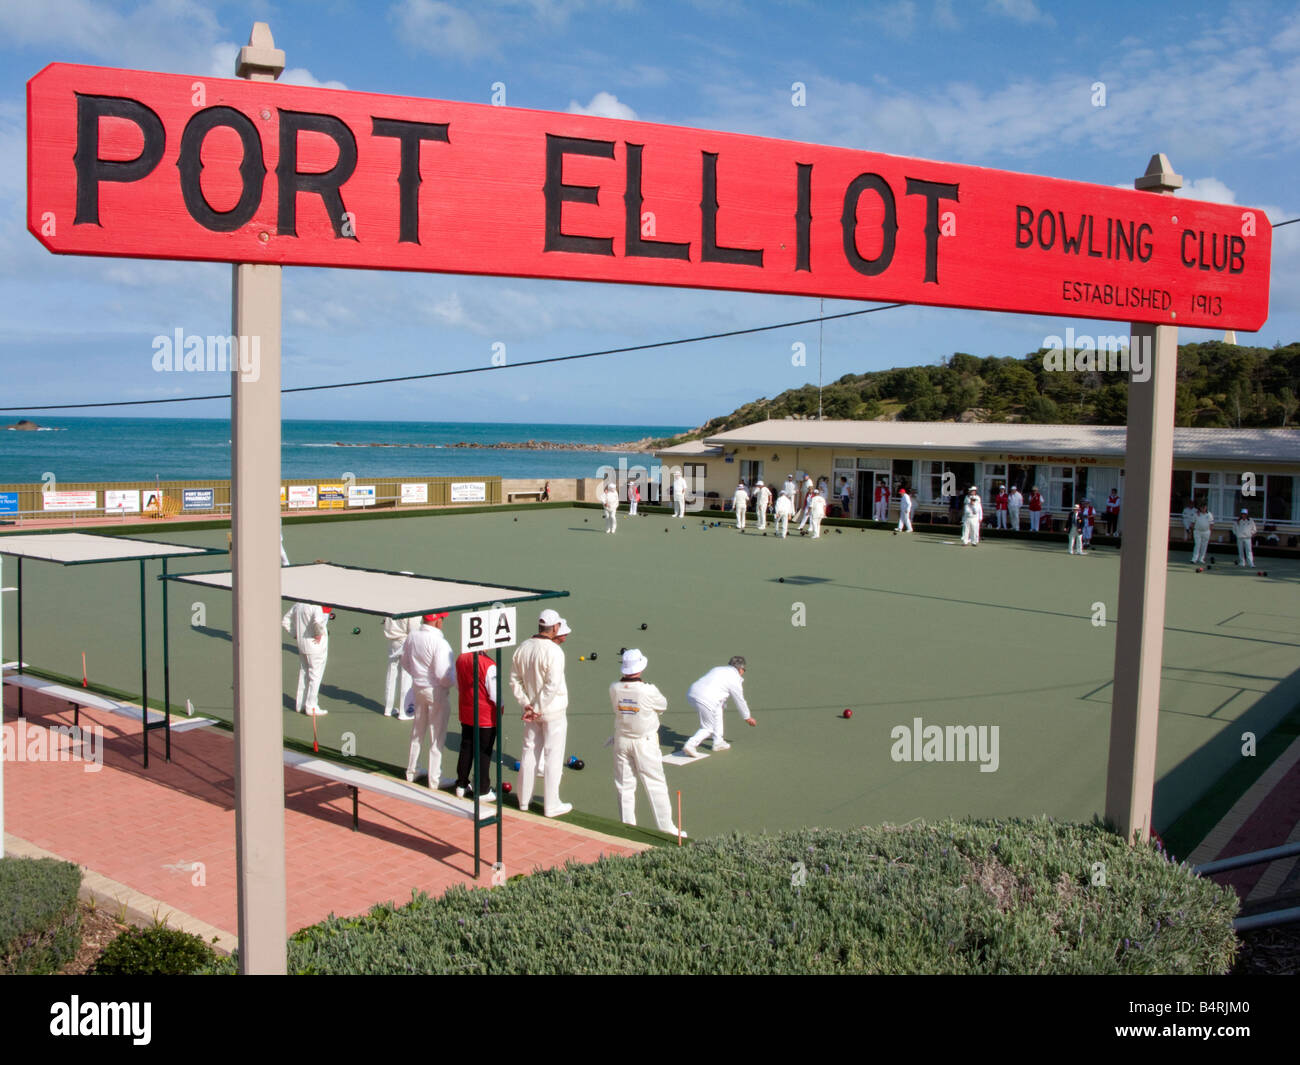 Bowlers dressed in white playing lawn bowls by the sea at Port Elliot in South Australia near Adelaide 2008 Stock Photo